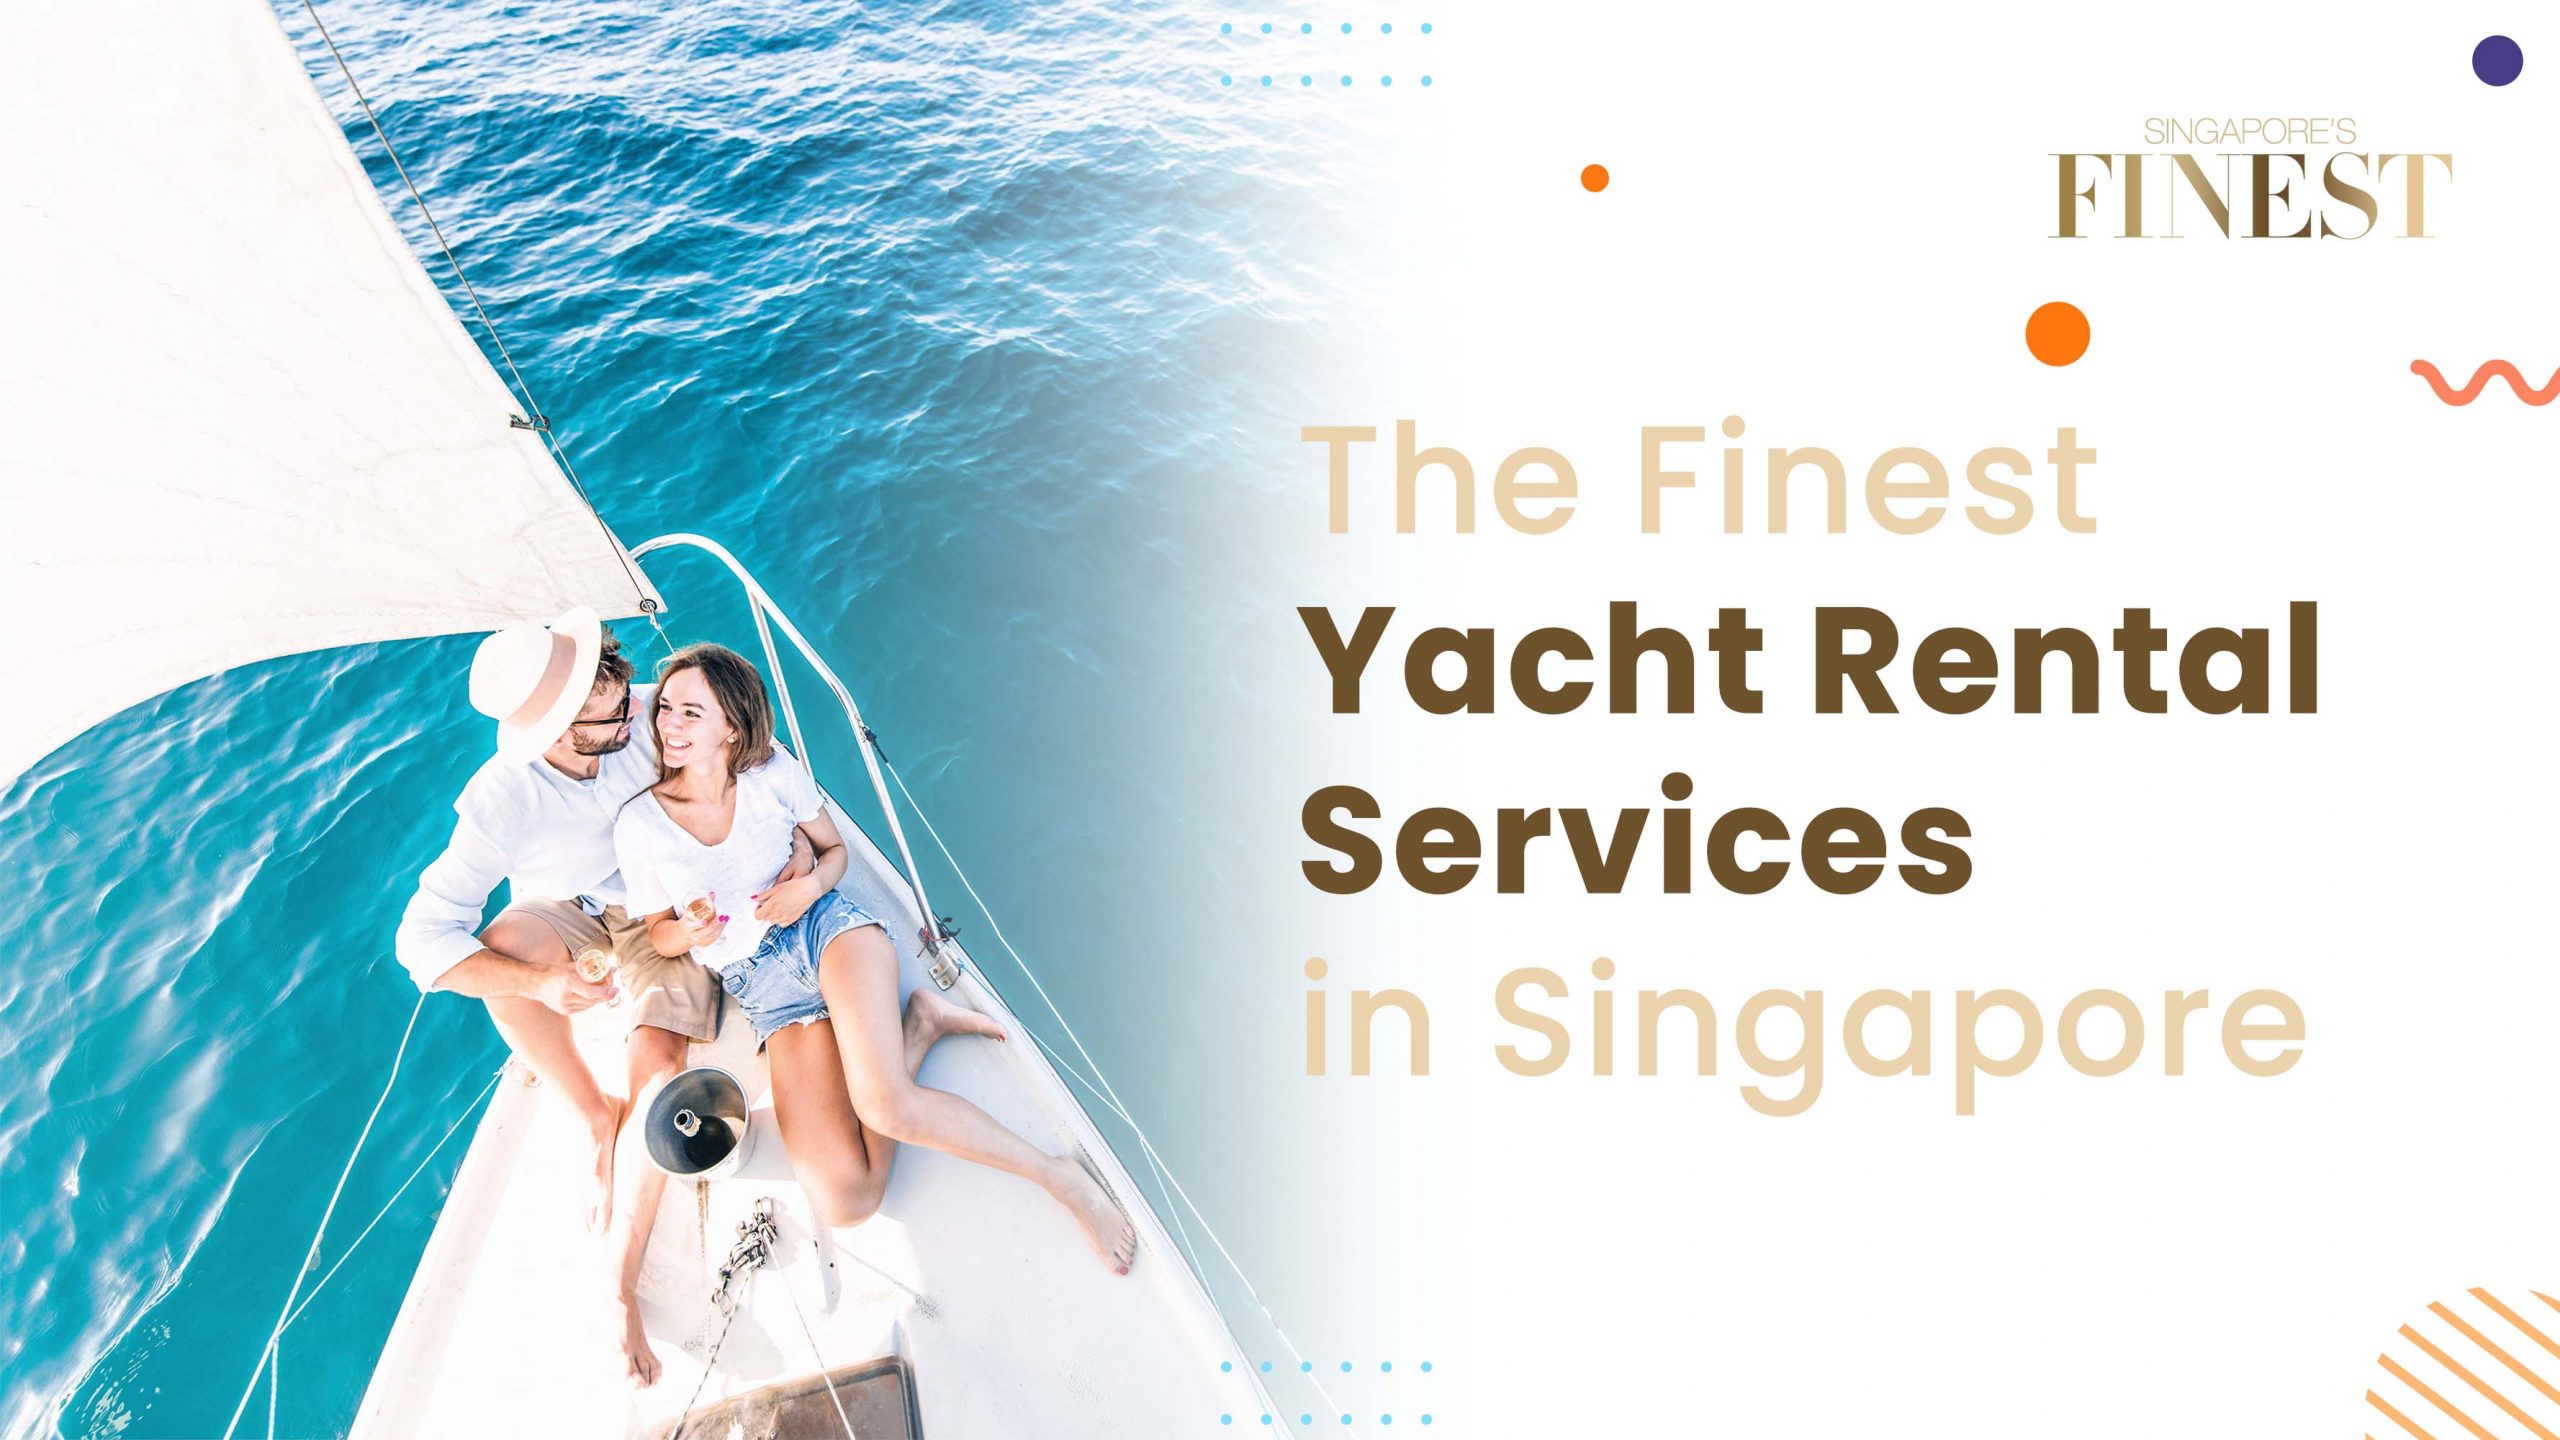 Finest Yacht Rental Services in Singapore